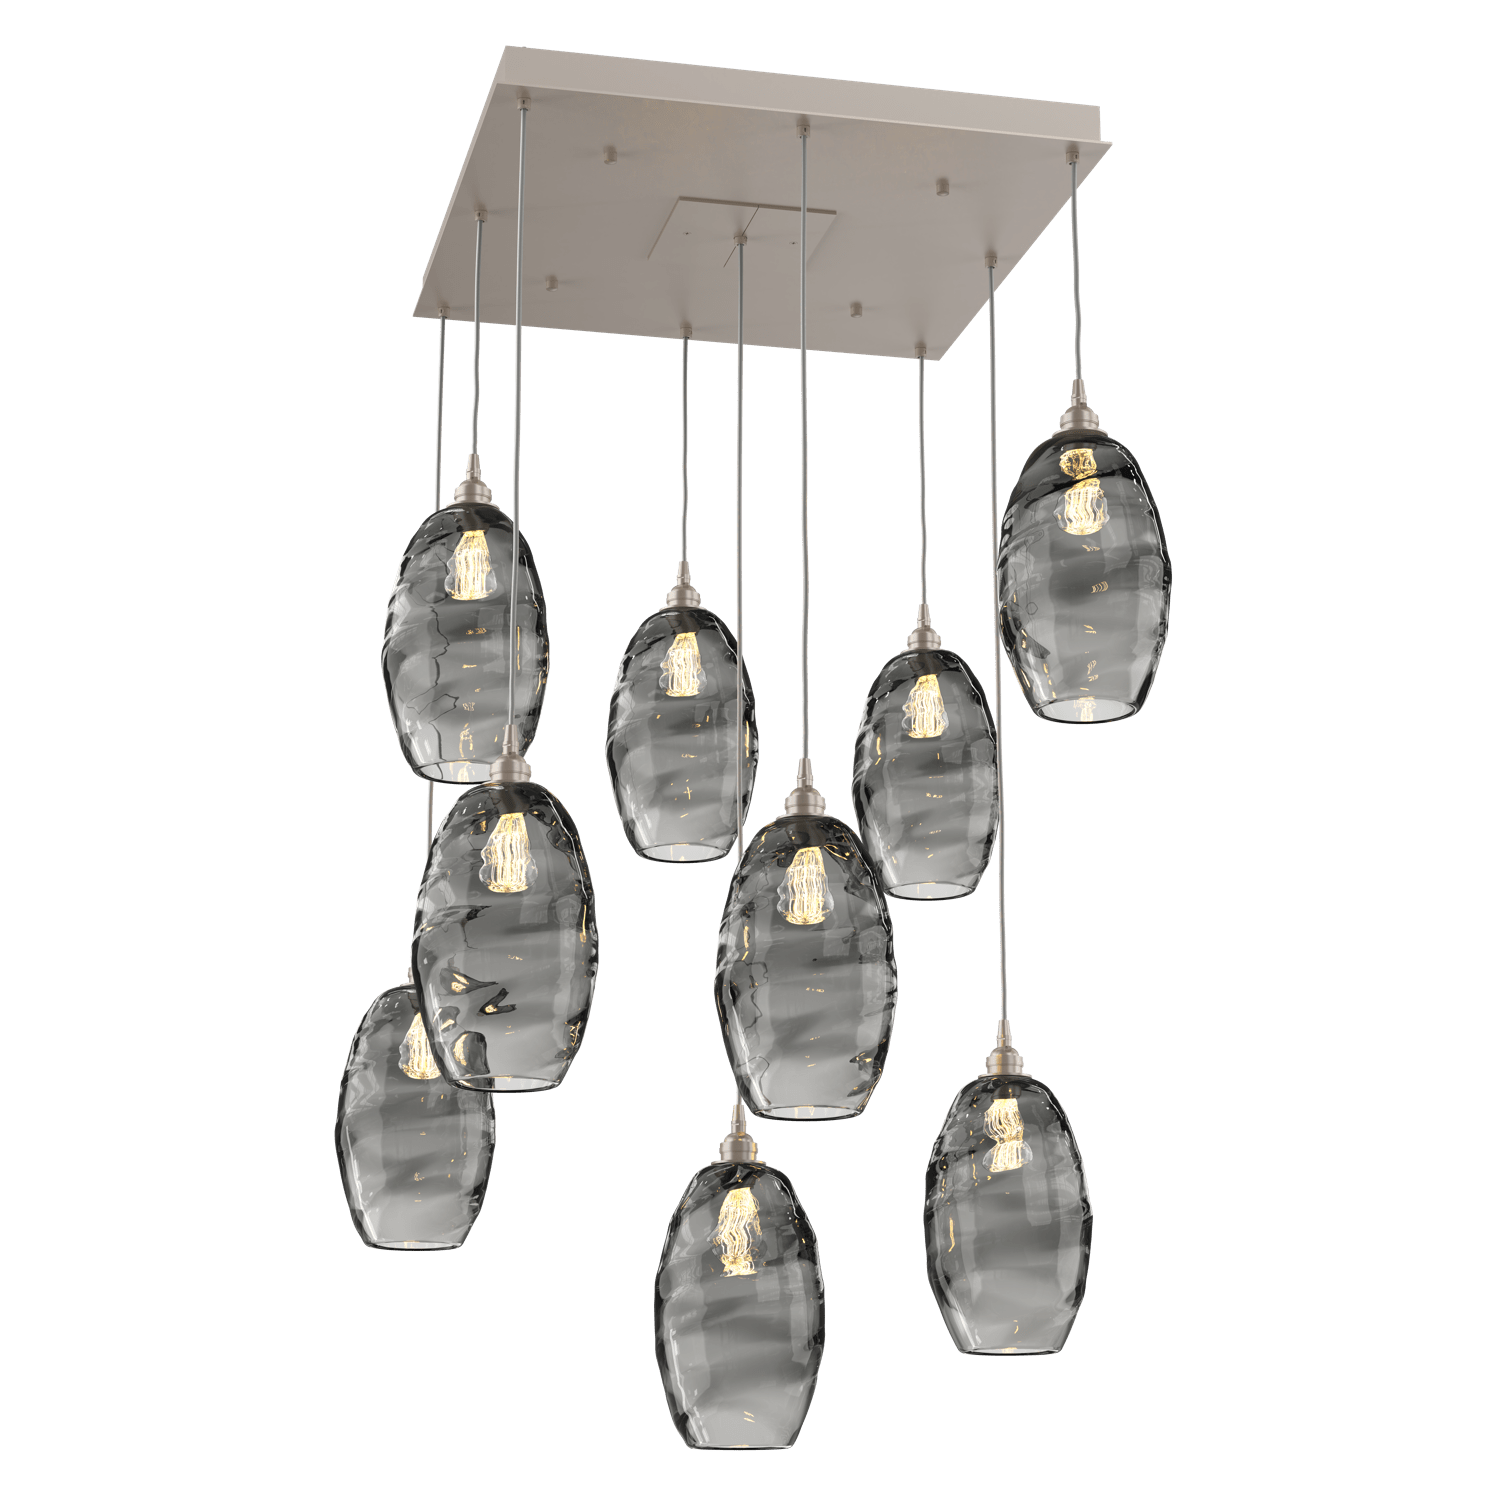 CHB0035-09-BS-OS-Hammerton-Studio-Optic-Blown-Glass-Elisse-9-light-square-pendant-chandelier-with-metallic-beige-silver-finish-and-optic-smoke-blown-glass-shades-and-incandescent-lamping